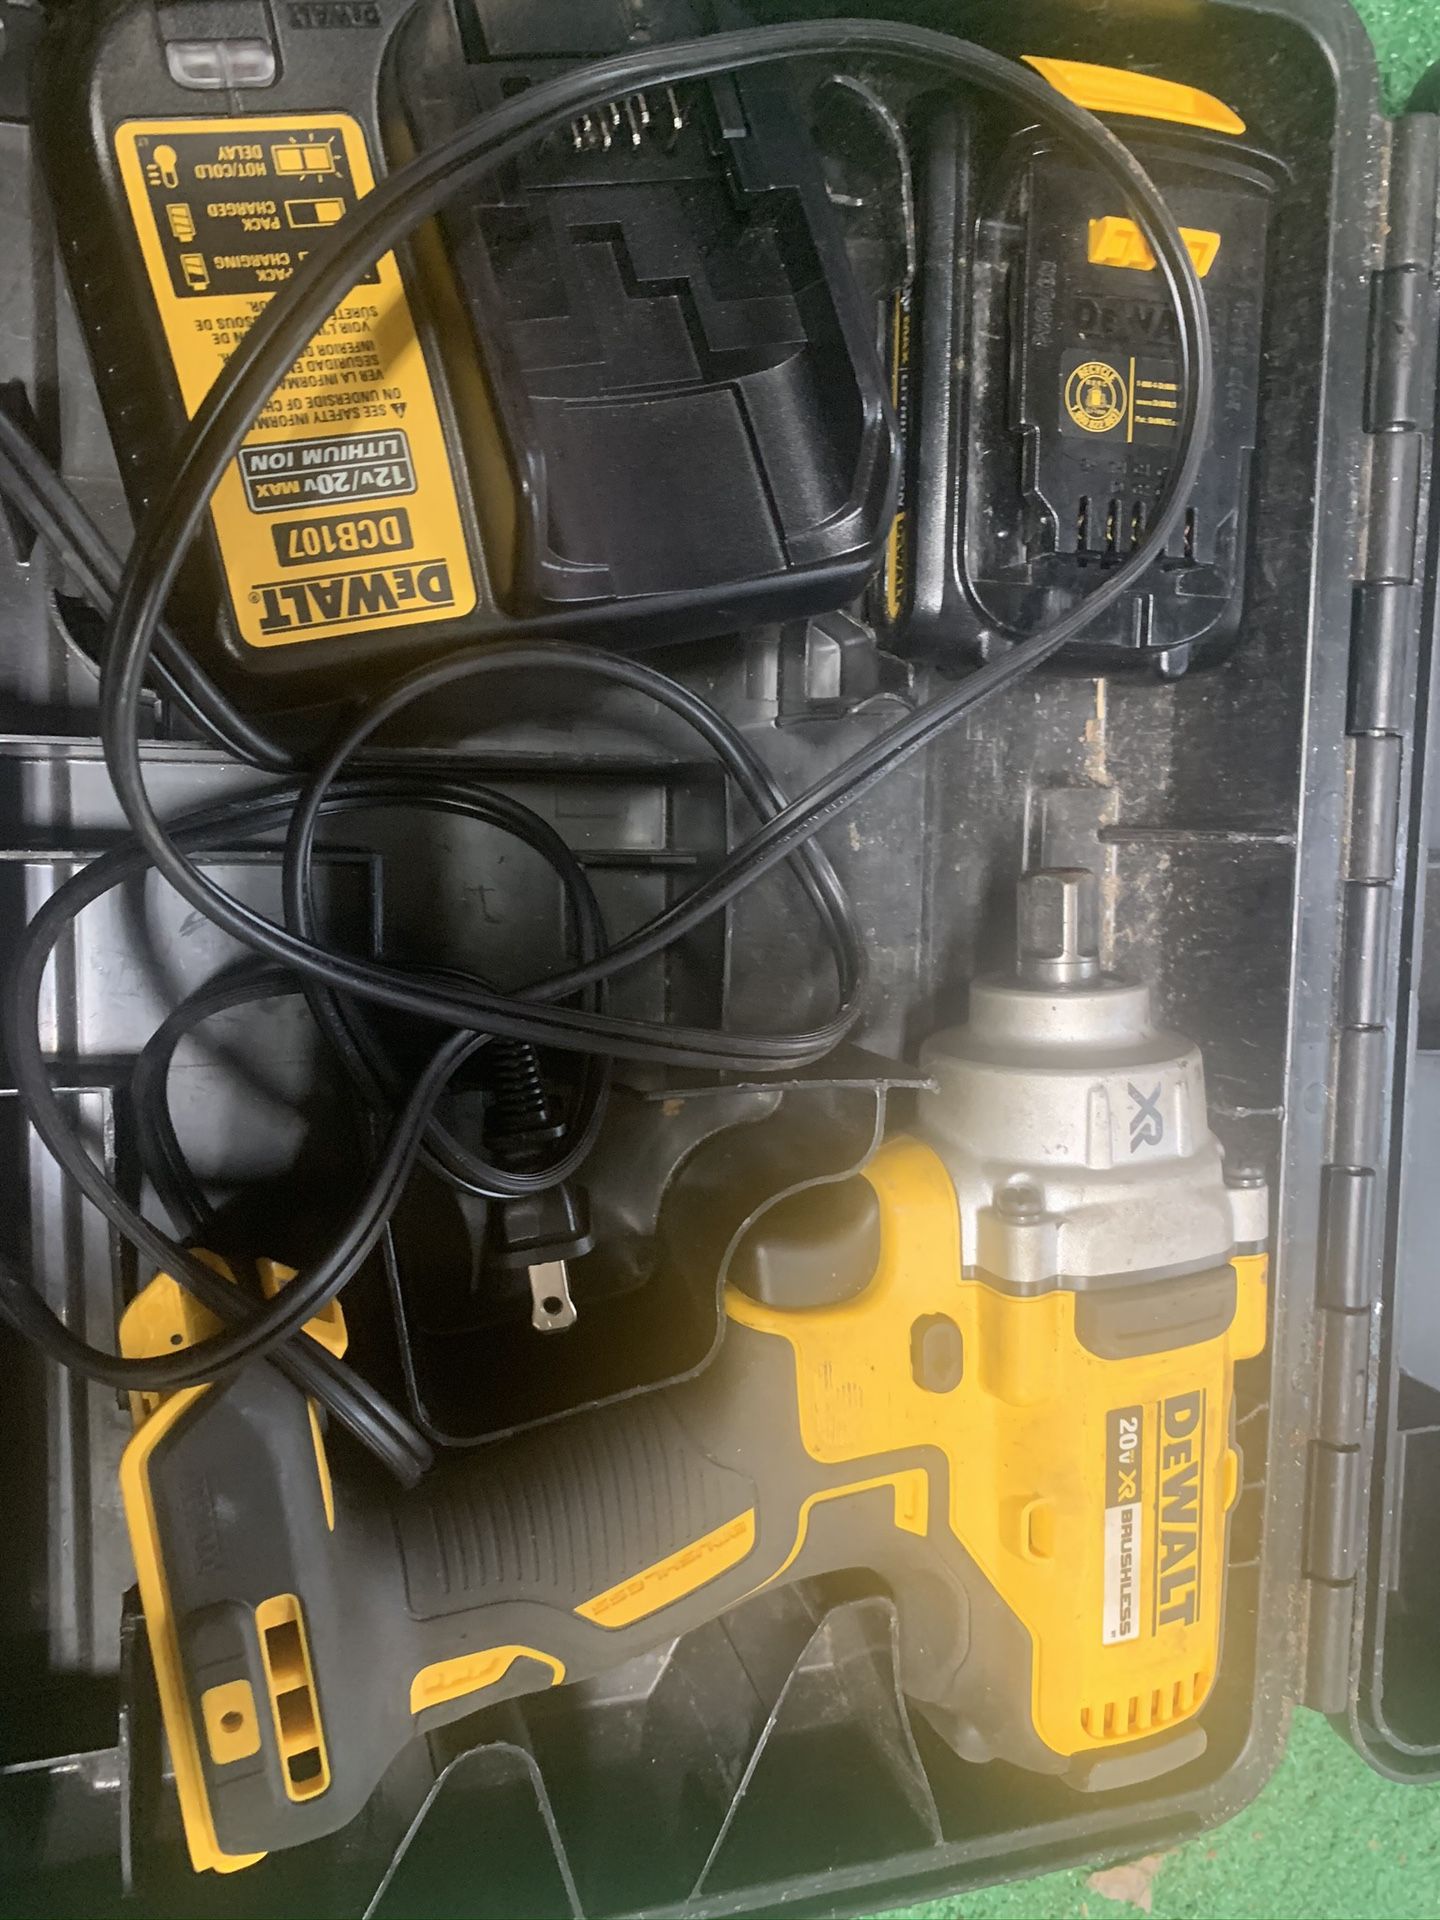 Dewalt Impact wrench with the charger and with the battery very good condition only used a couple times